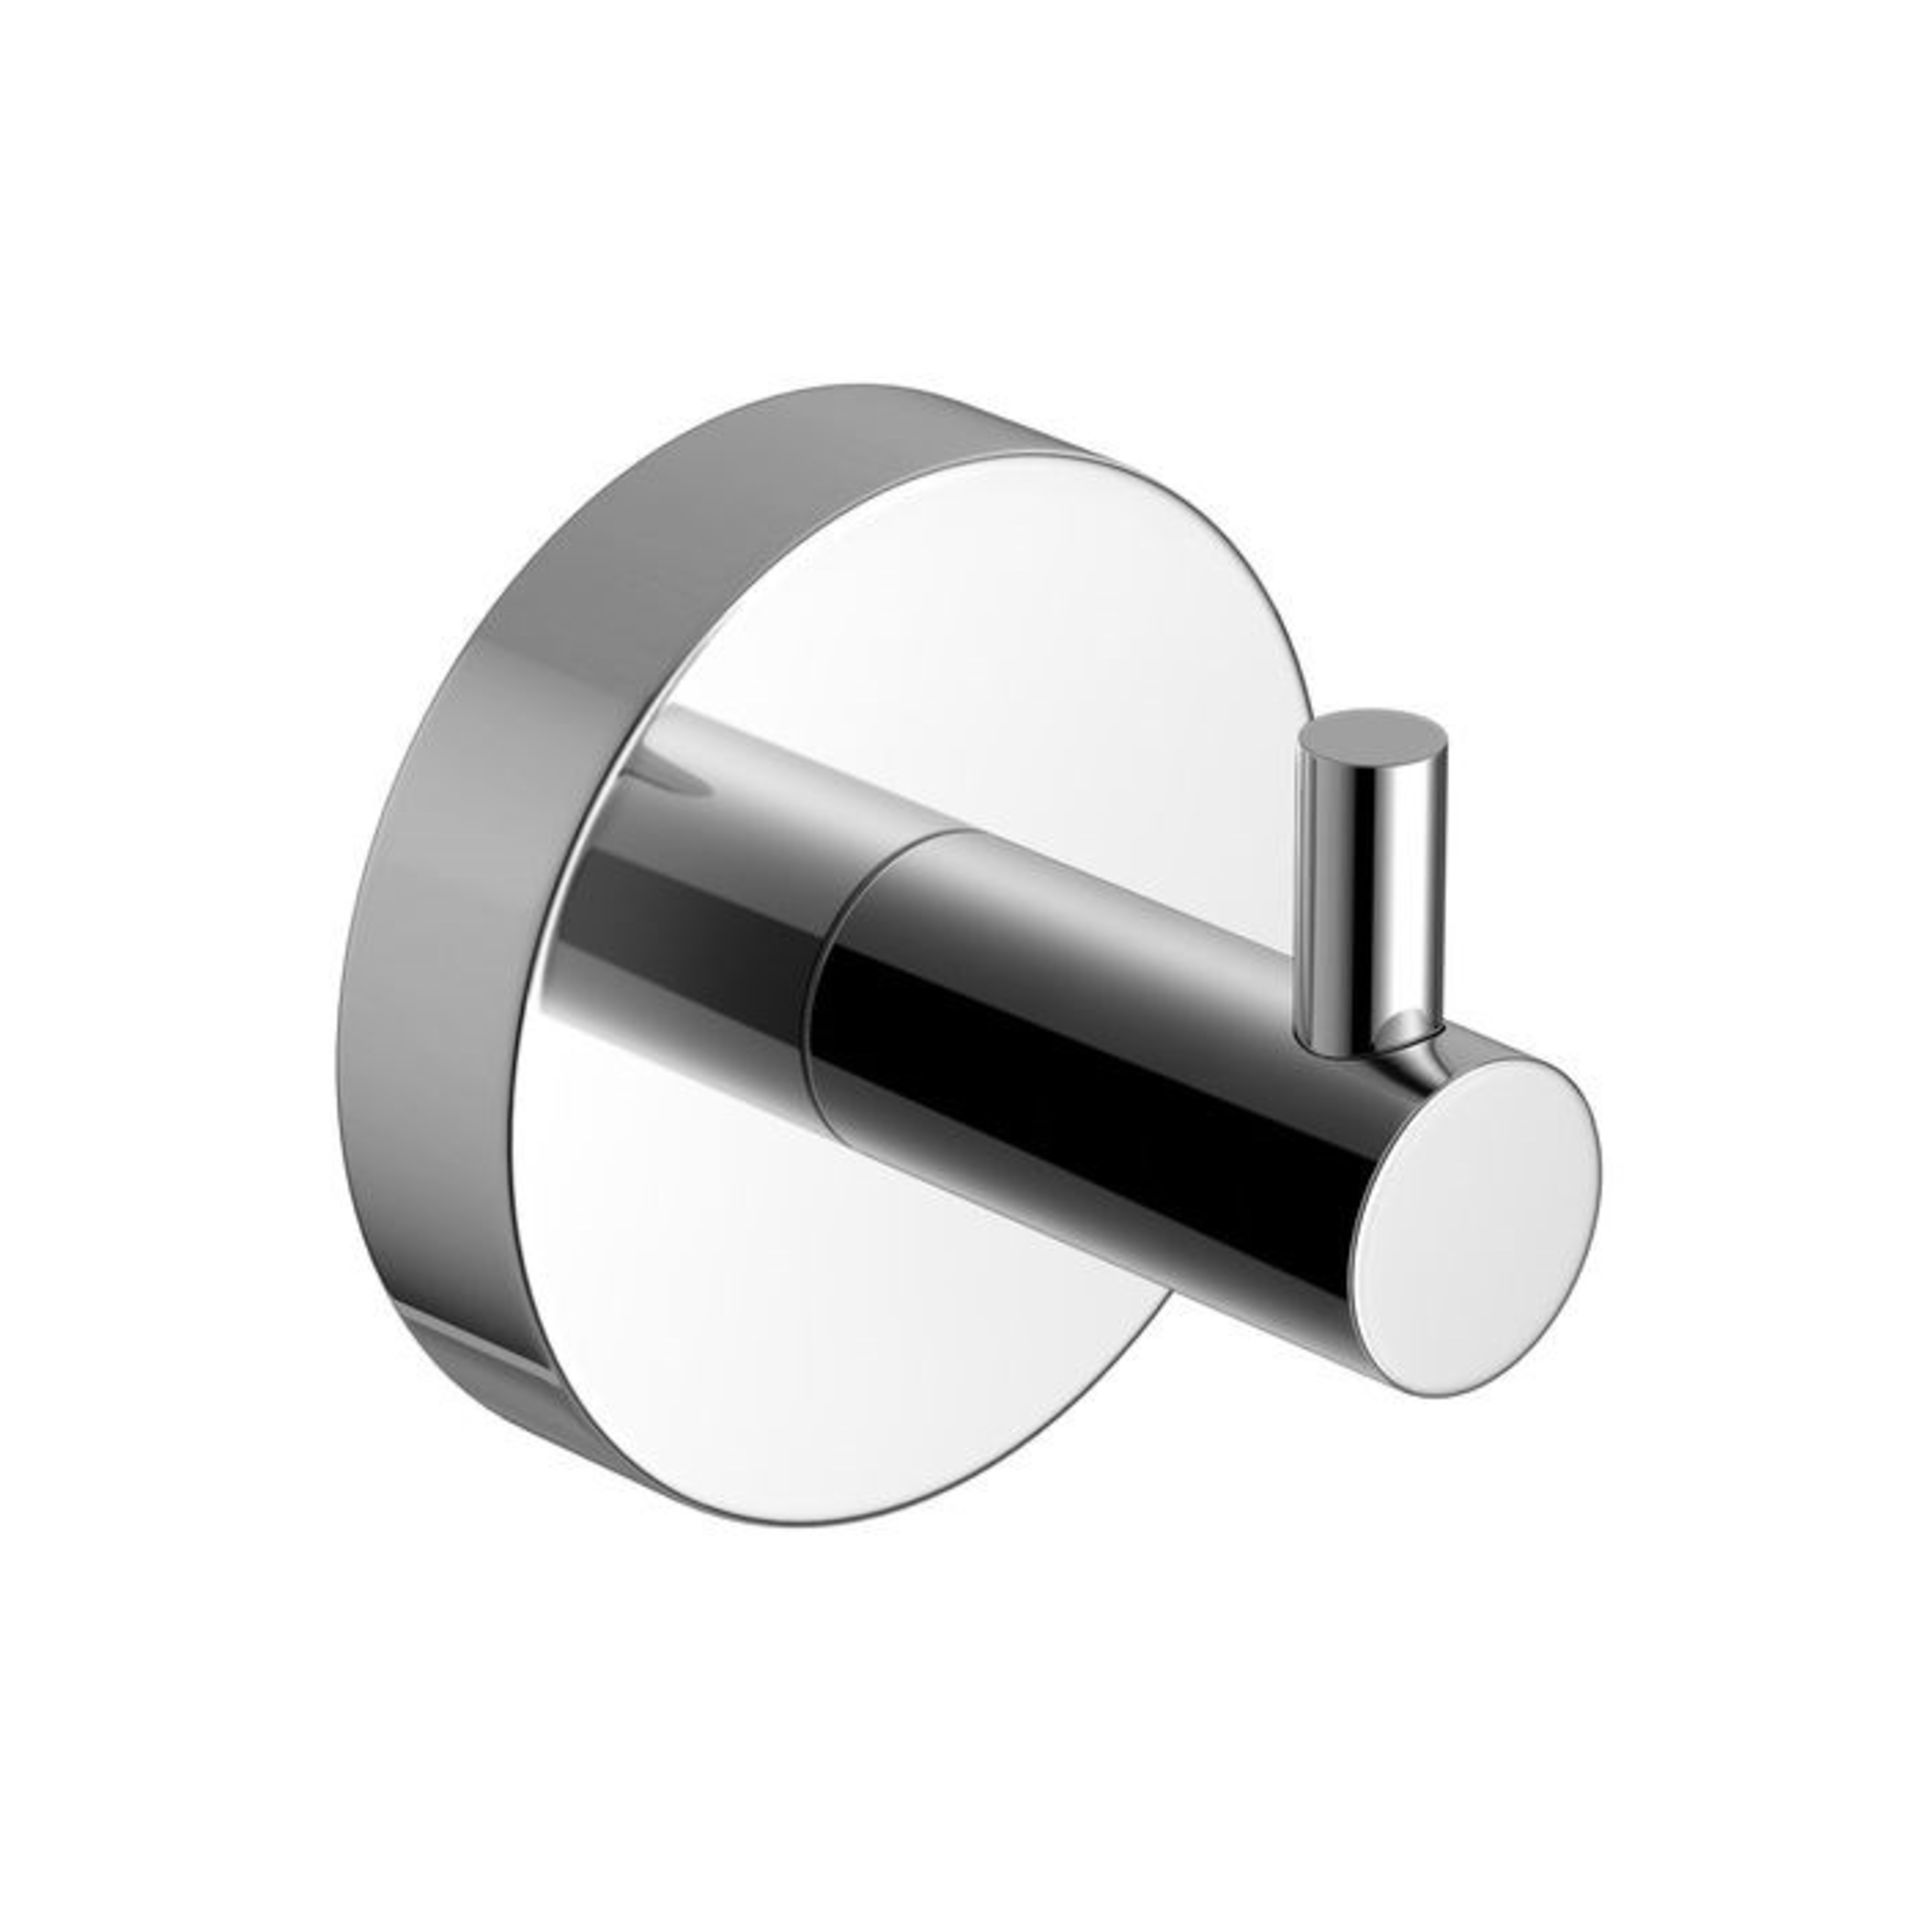 (NV1000) 15mm Standard Connection Angled Radiator Valves - Heavy Duty Polished Chrome Plated Br... - Image 3 of 6